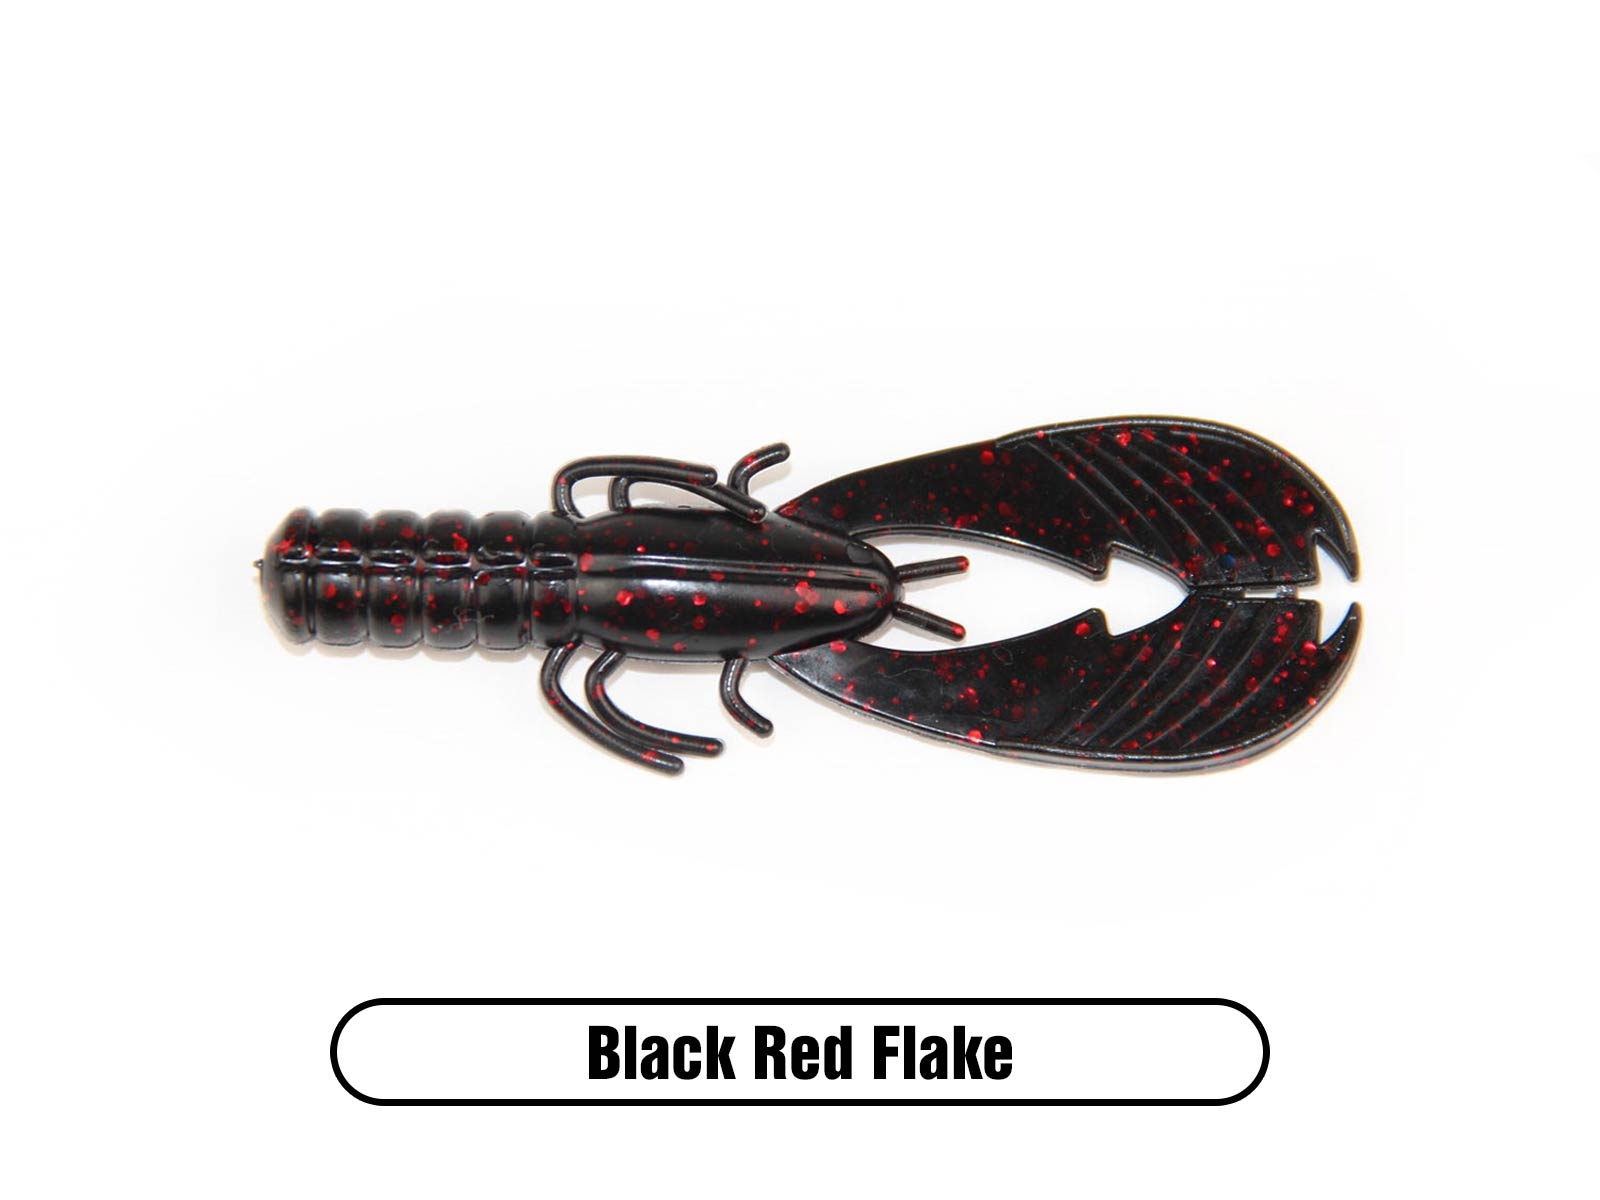 Muscle Back Craw 4 (7 Pack) – X Zone Lures